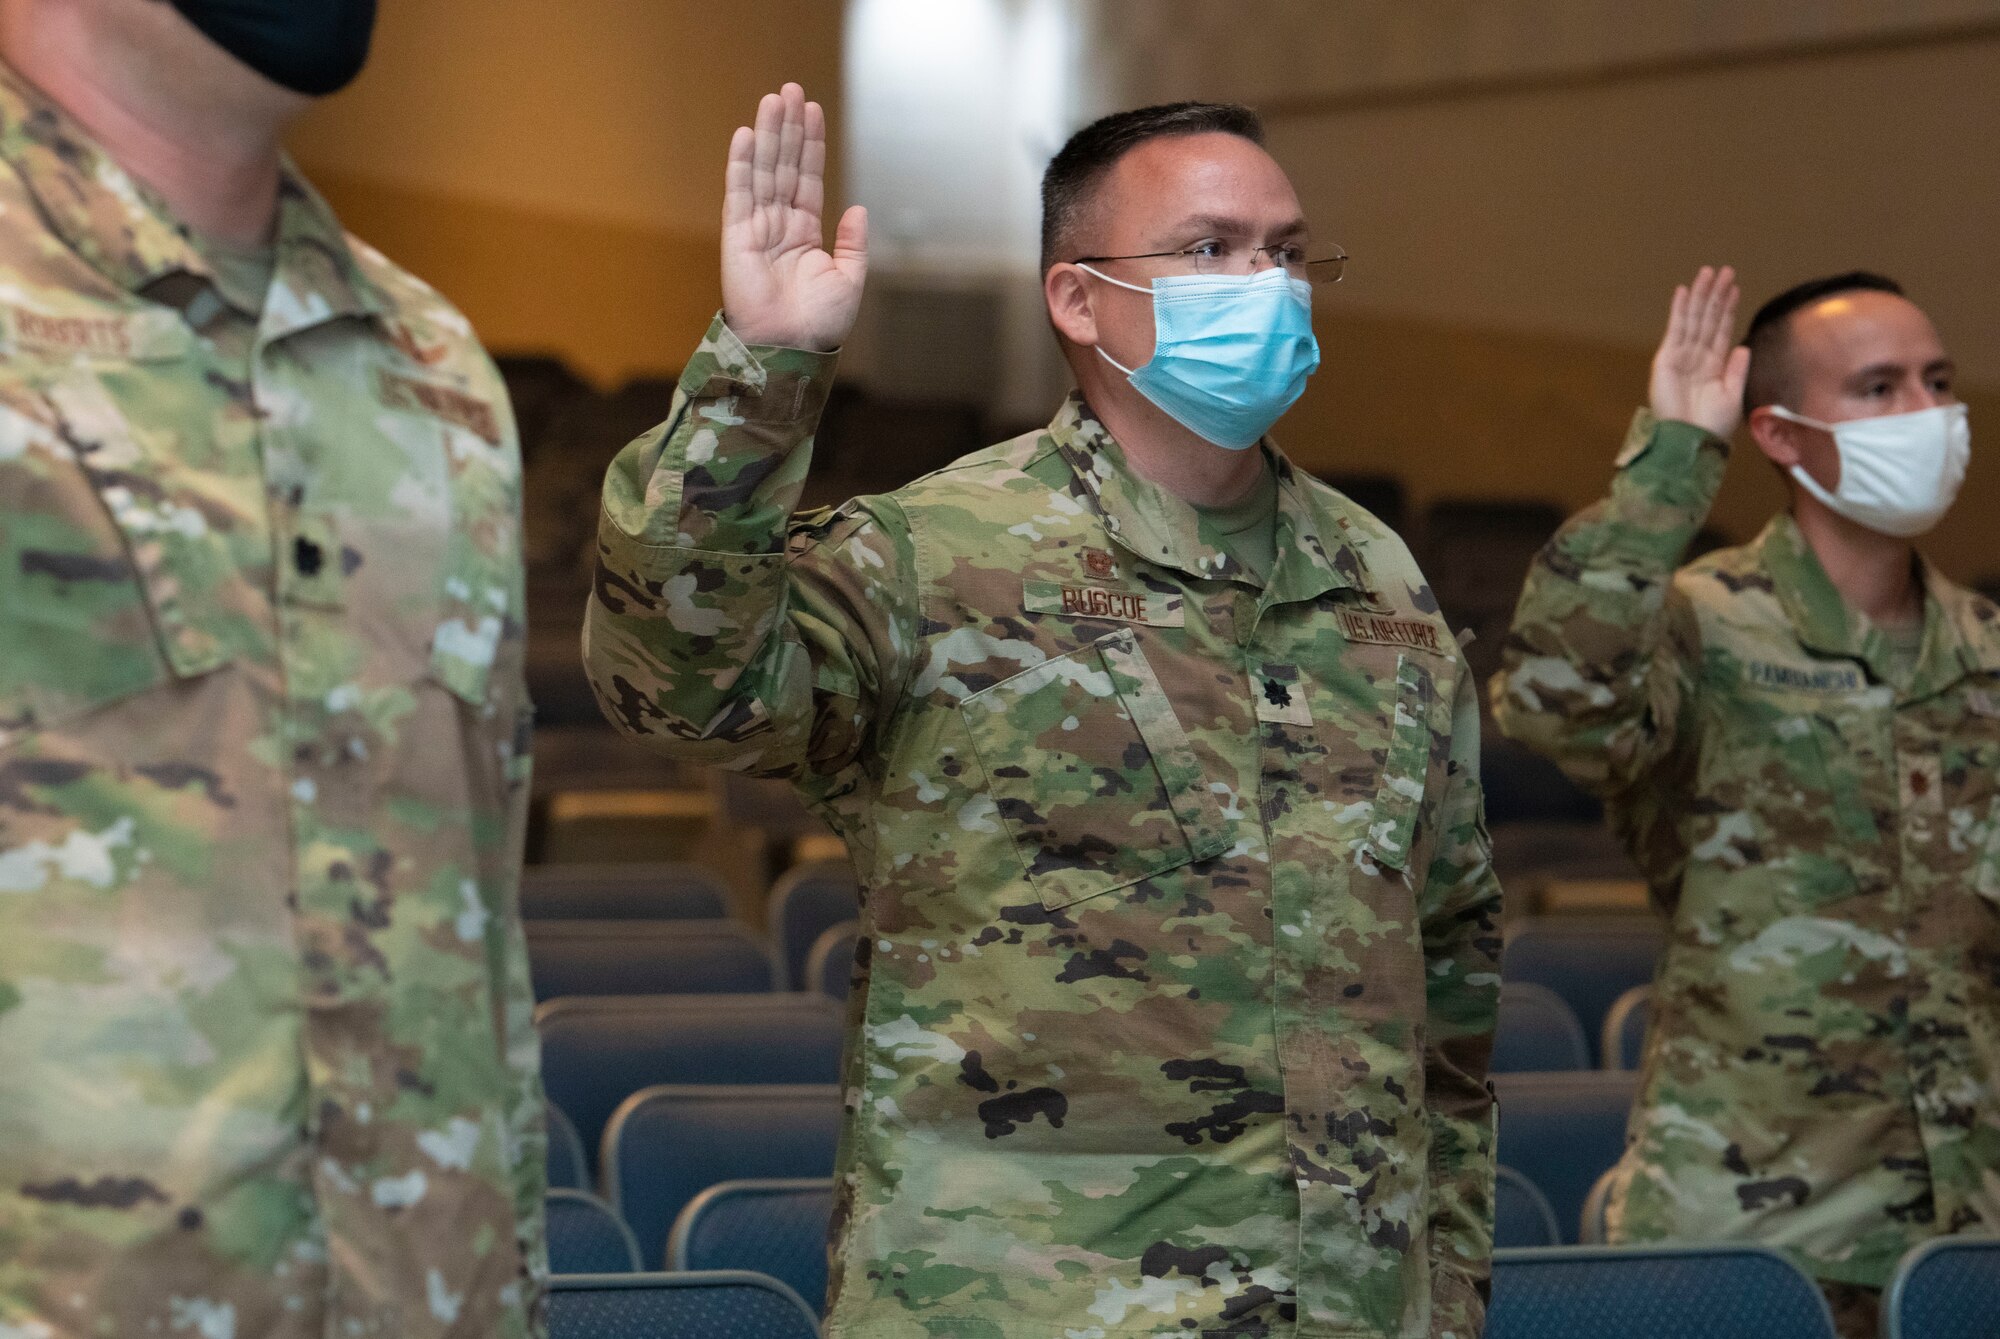 Air Force officers, assigned to Air University, raise their right hand and recite the Oath of Office during a ceremonial swear-in in Polifka Auditorium.